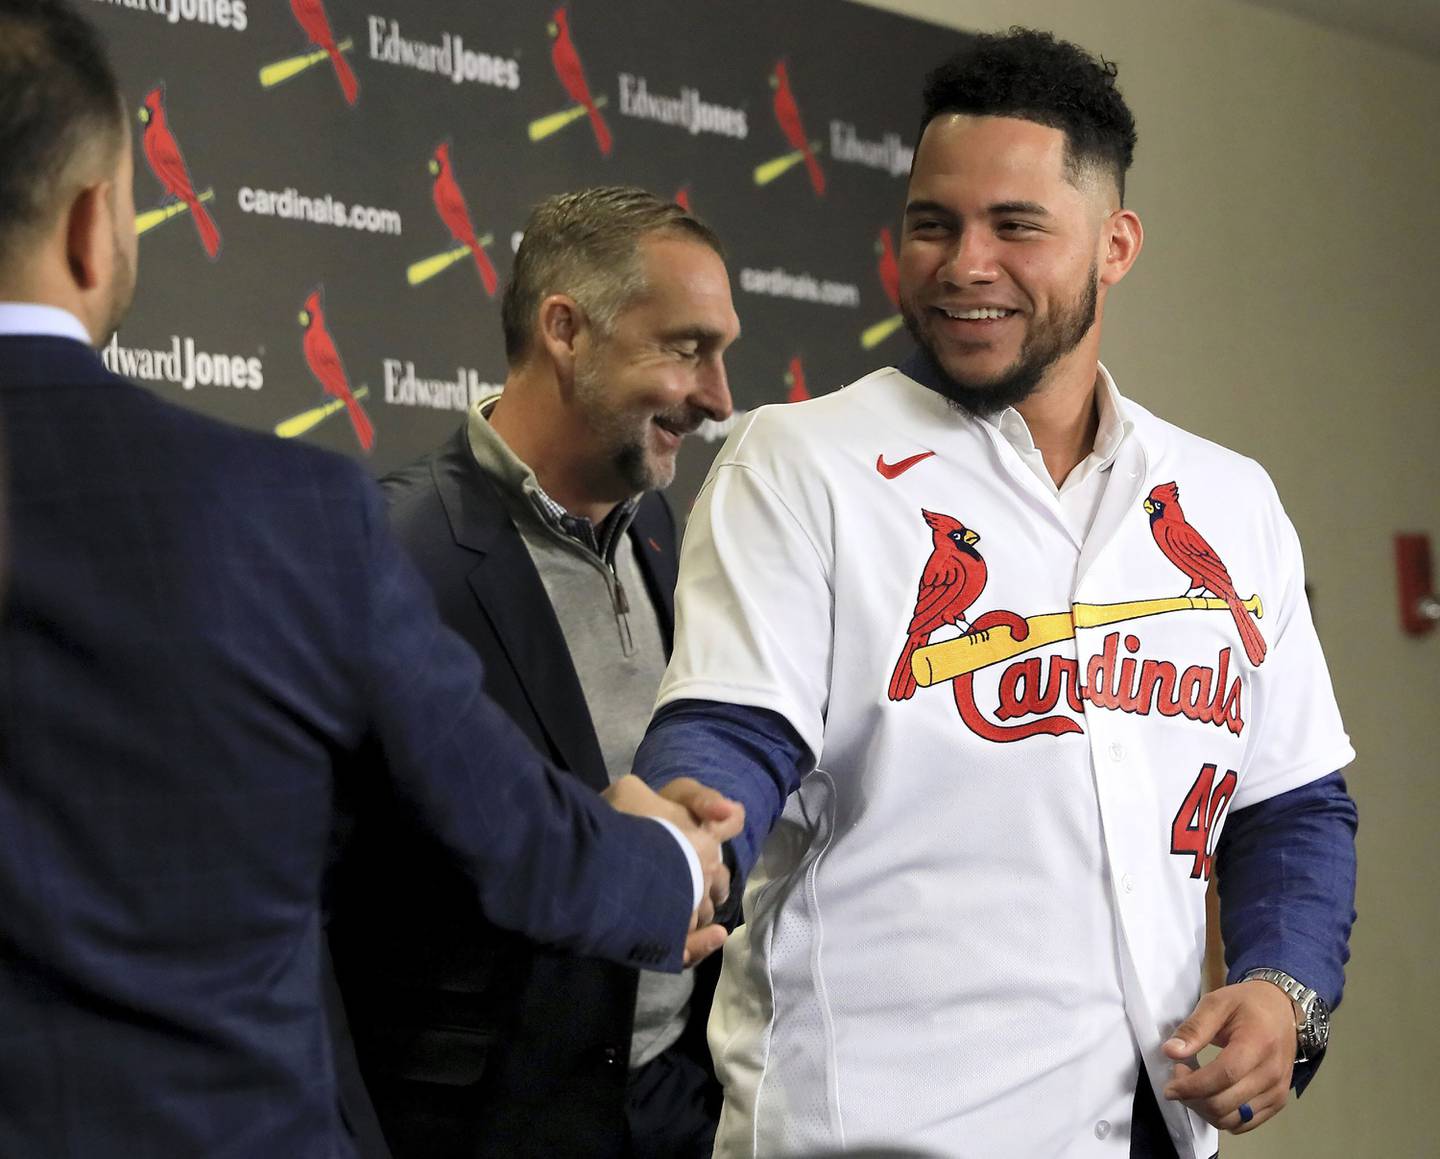 New Cardinals catcher Willson Contreras, right, shakes hands with manager Oliver Marmol after a news conference at Busch Stadium on Dec. 9, 2022.